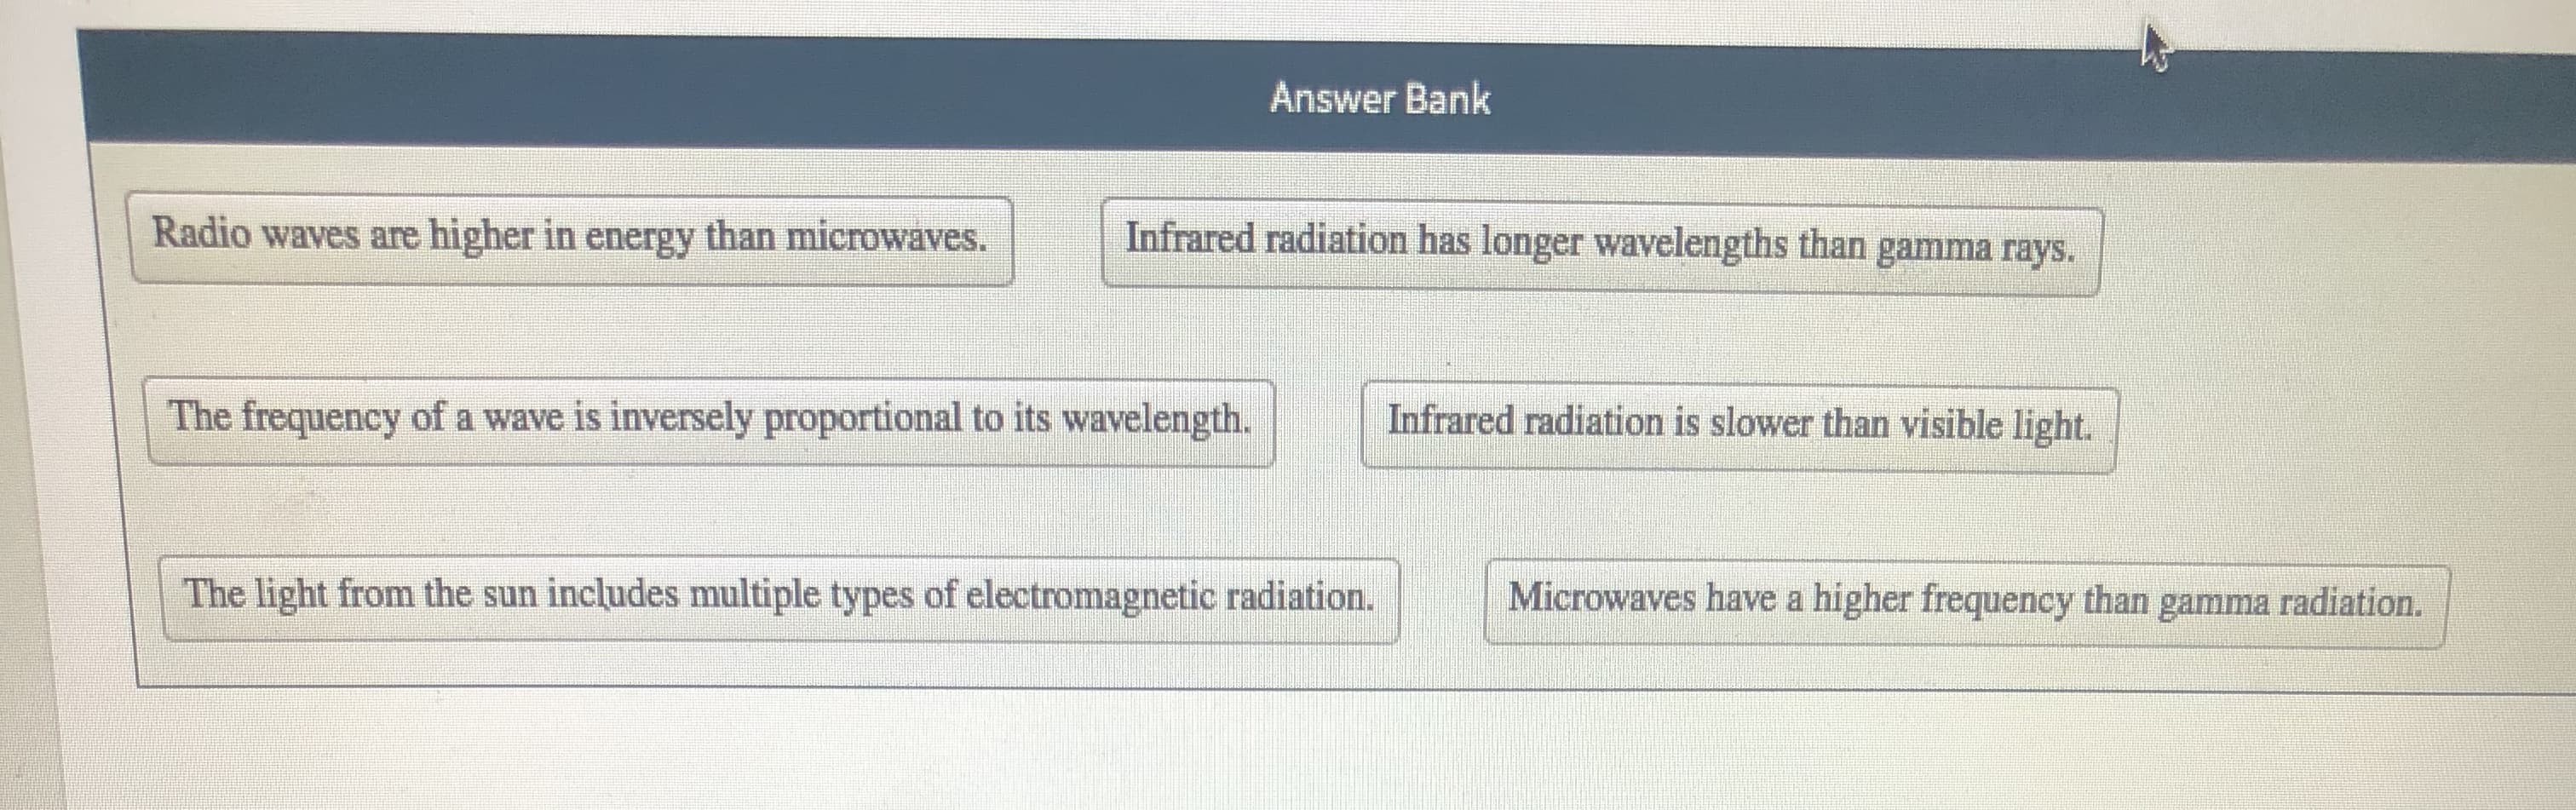 Radio waves are higher in energy than microwaves.
Infrared radiation has longer wavelengths than gamma rays.
The frequency of a wave is inversely proportional to its wavelength.
Infrared radiation is slower than visible light.
The light from the sun includes multiple types of electromagnetic radiation.
Microwaves have a higher frequency than gamma radiation.
